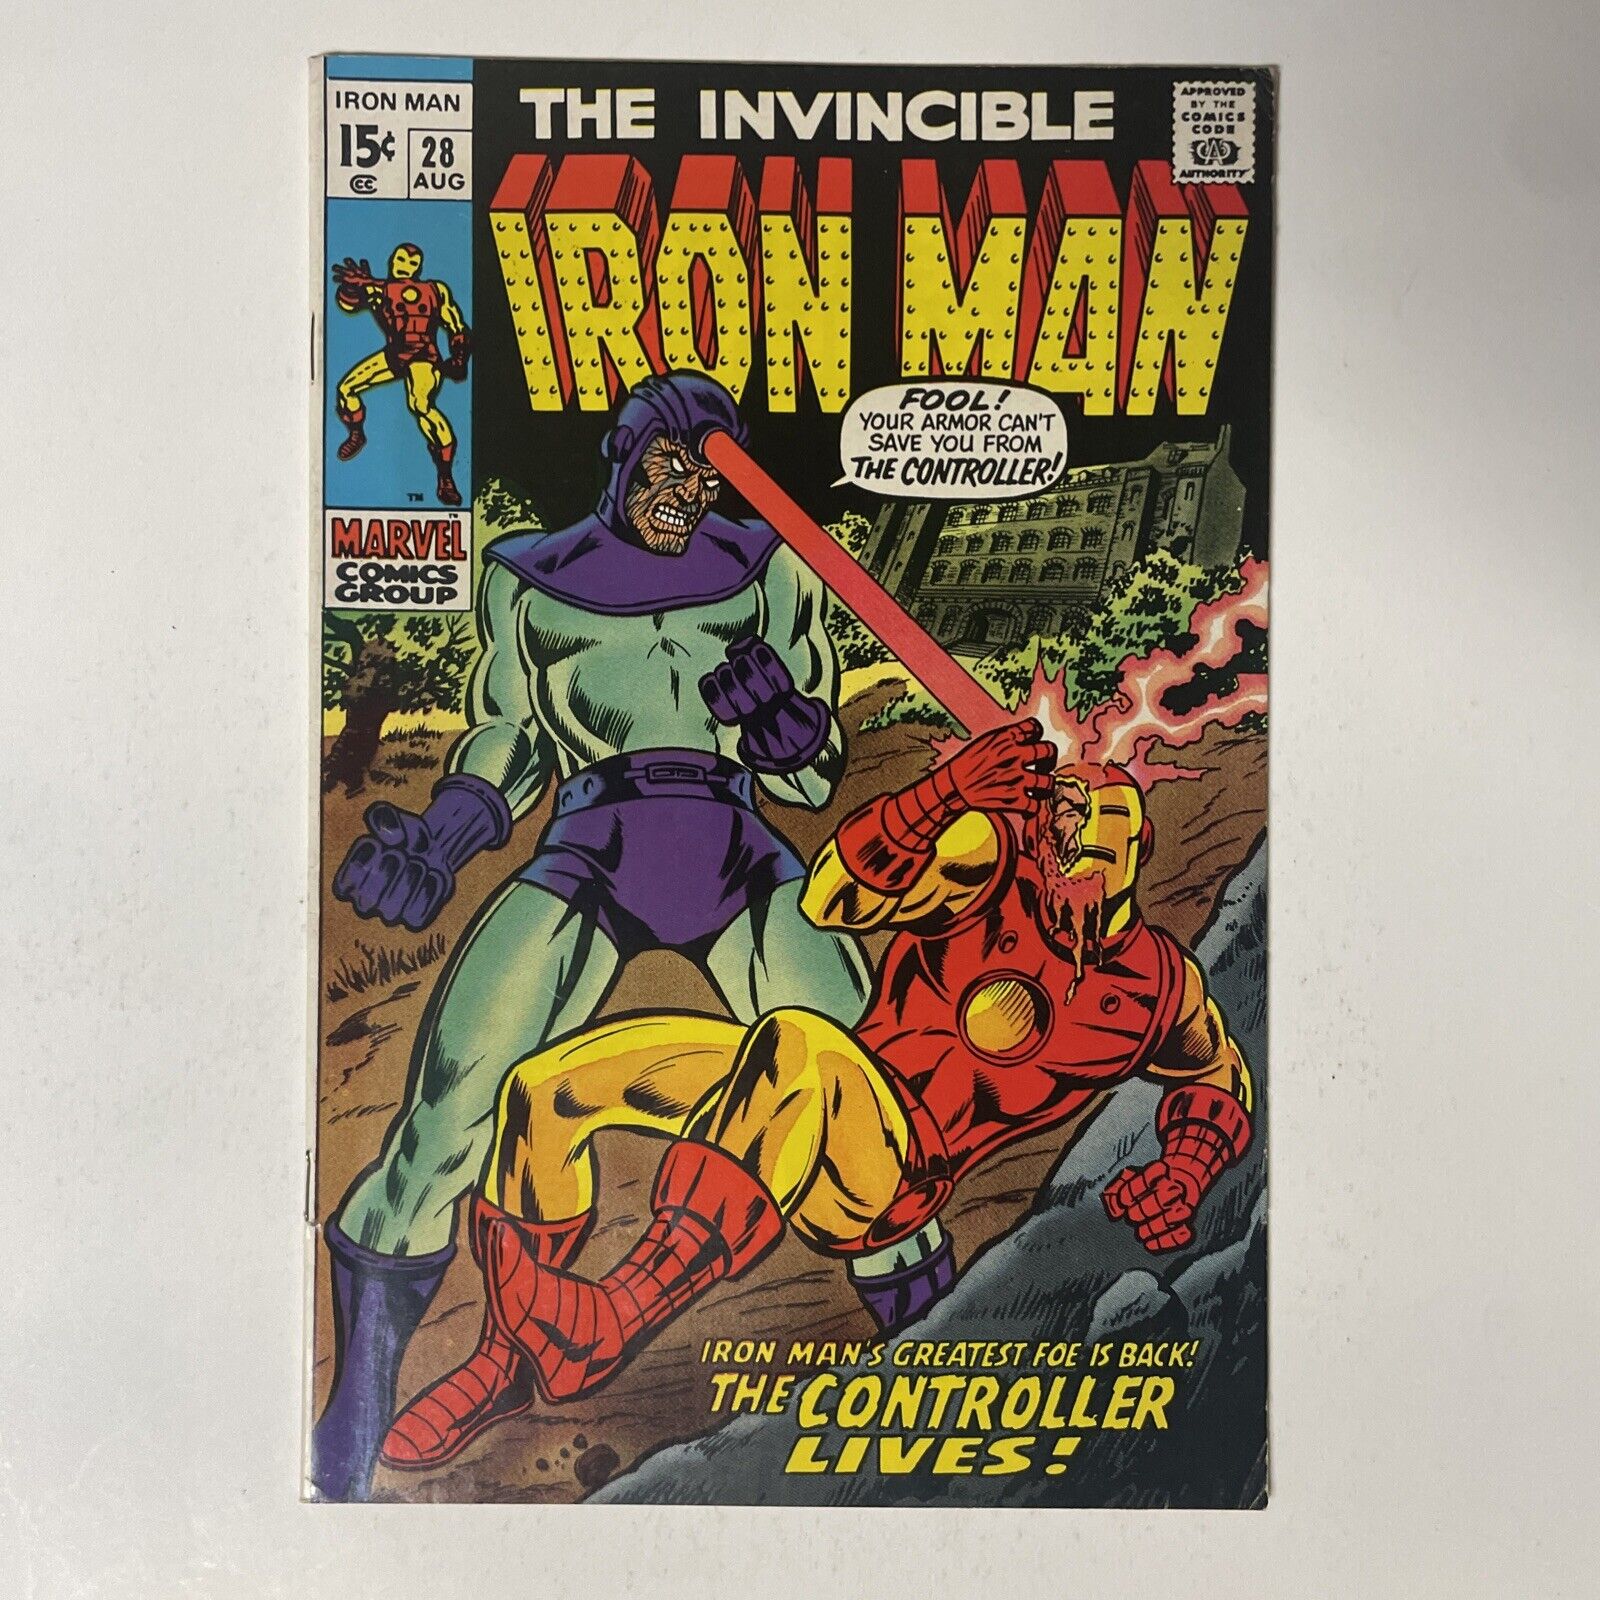 The Invincible Iron Man #28 1st Appearance of Howard Stark •HIGH GRADE•